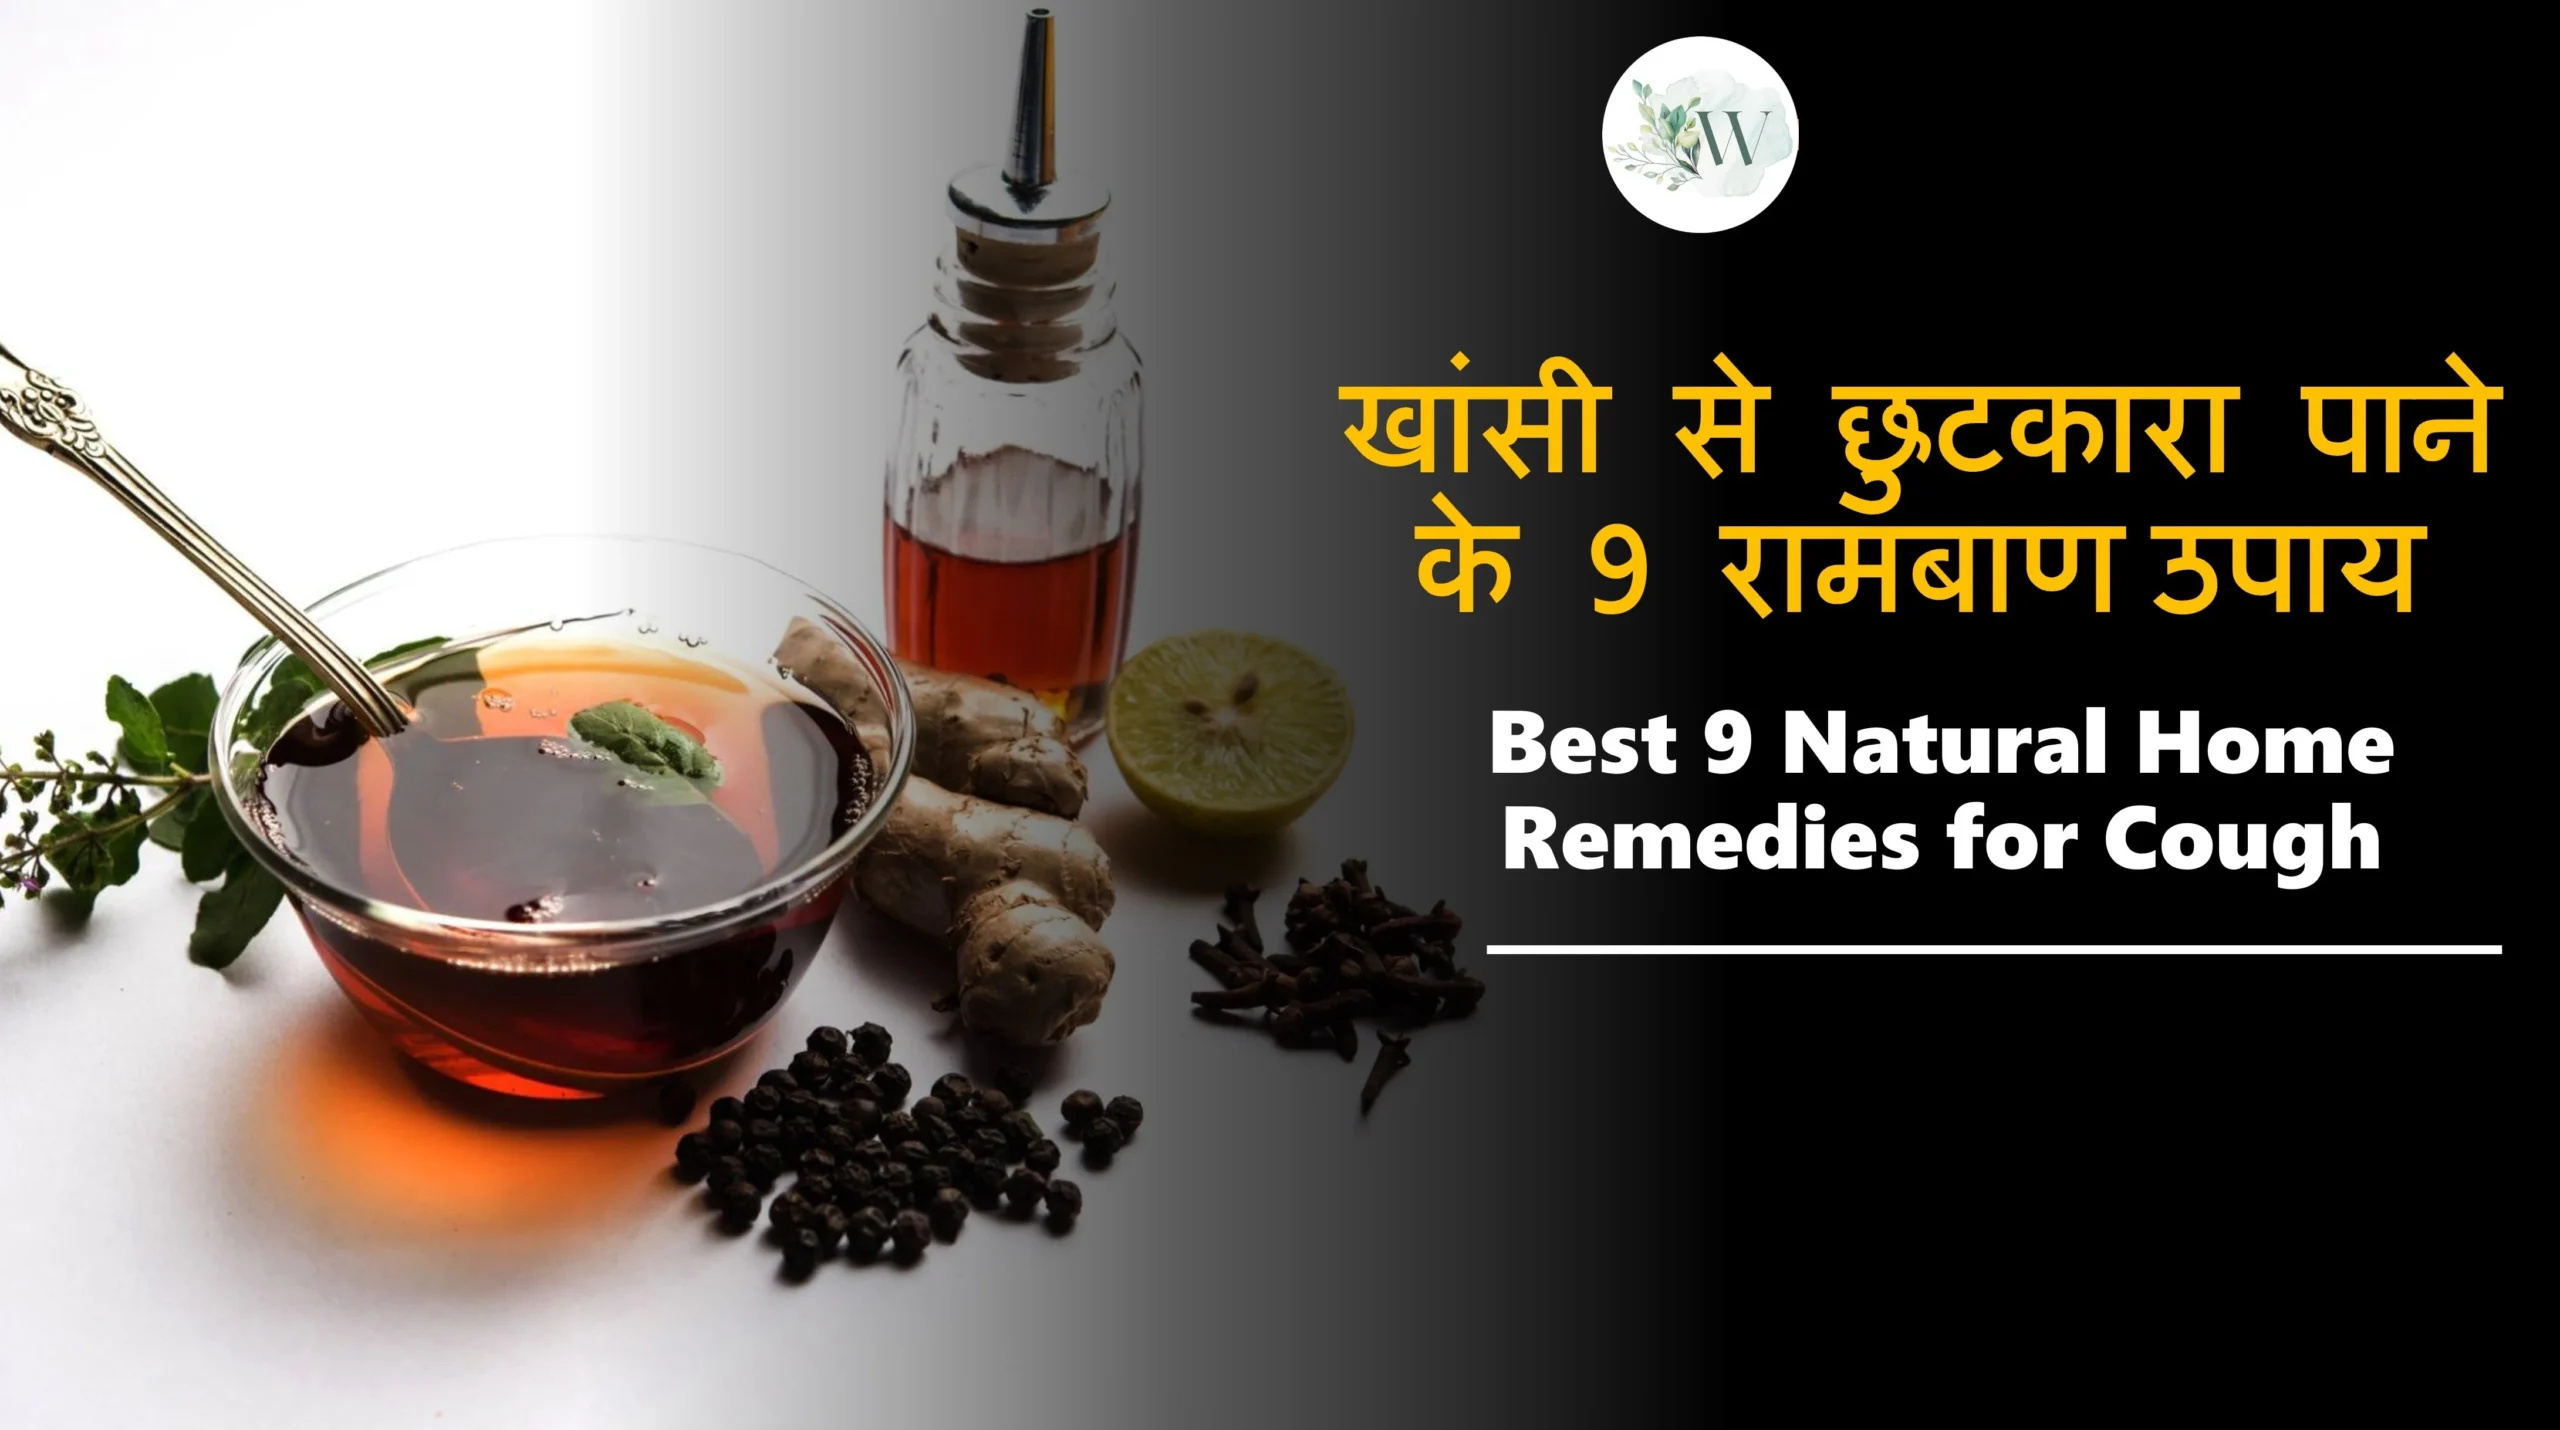 Best 9 Natural Home Remedies for Cough in Hindi